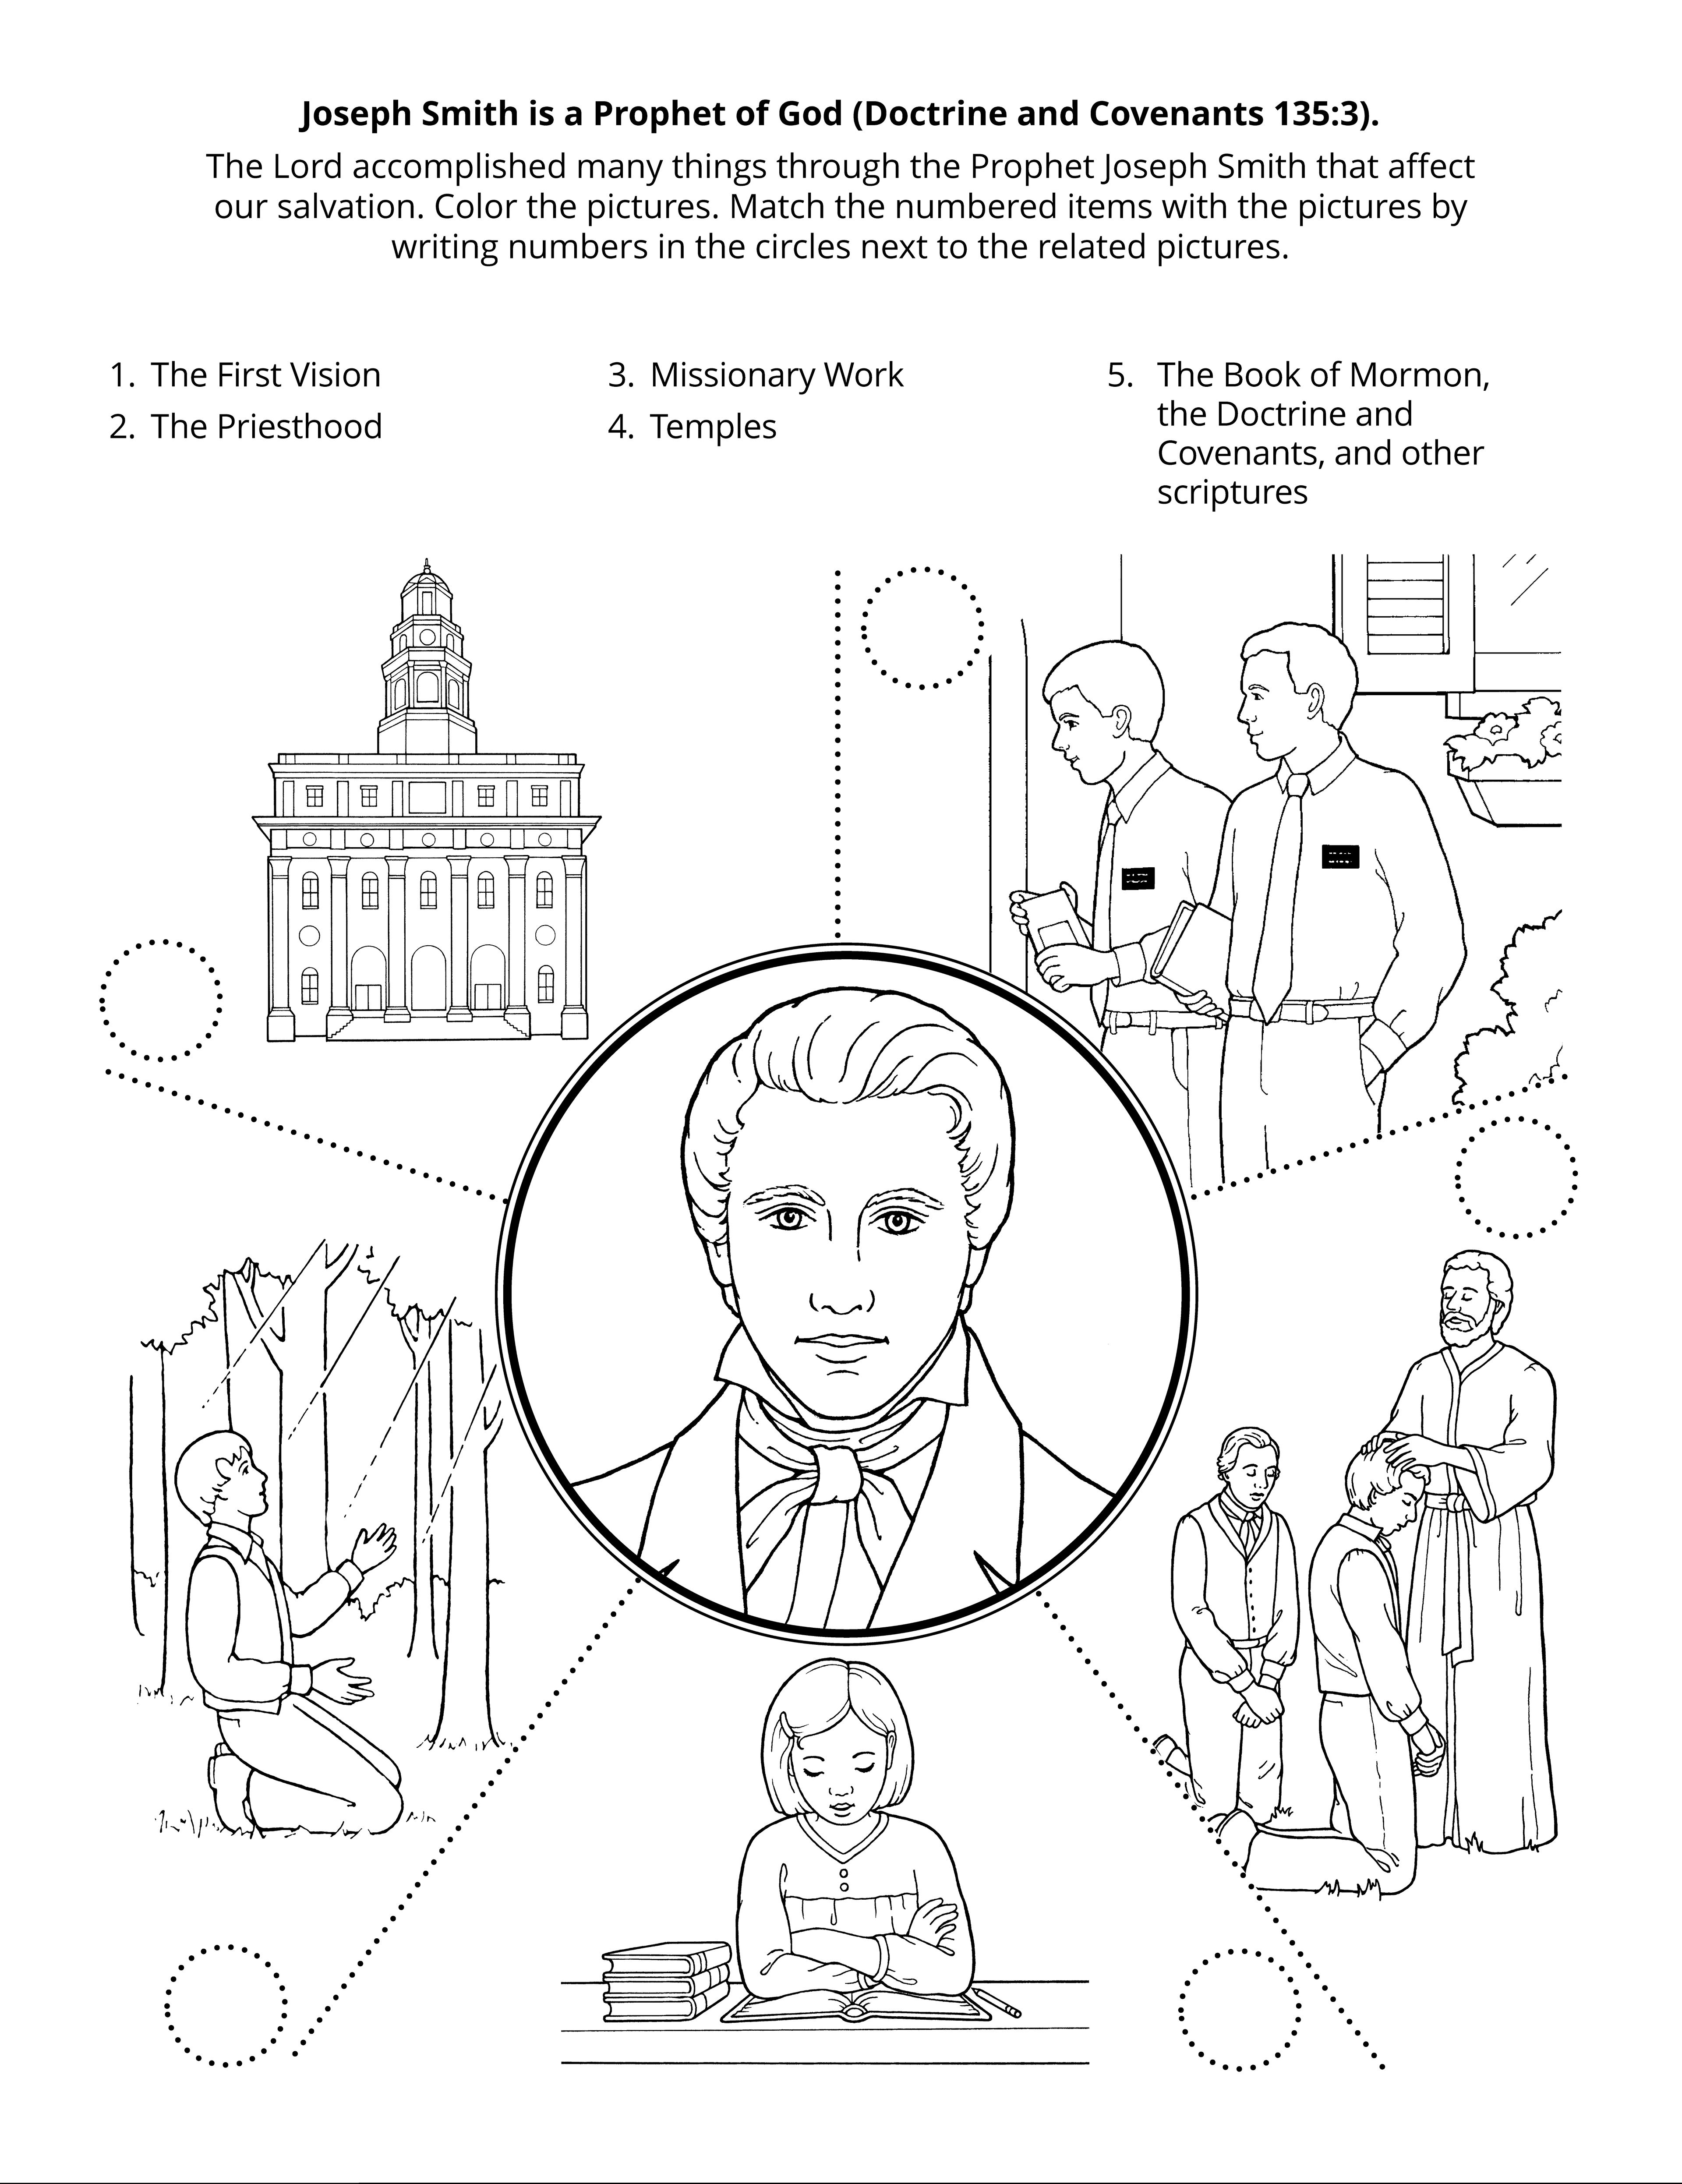 Line art drawing depicts Joseph Smith for coloring. © undefined ipCode 1.